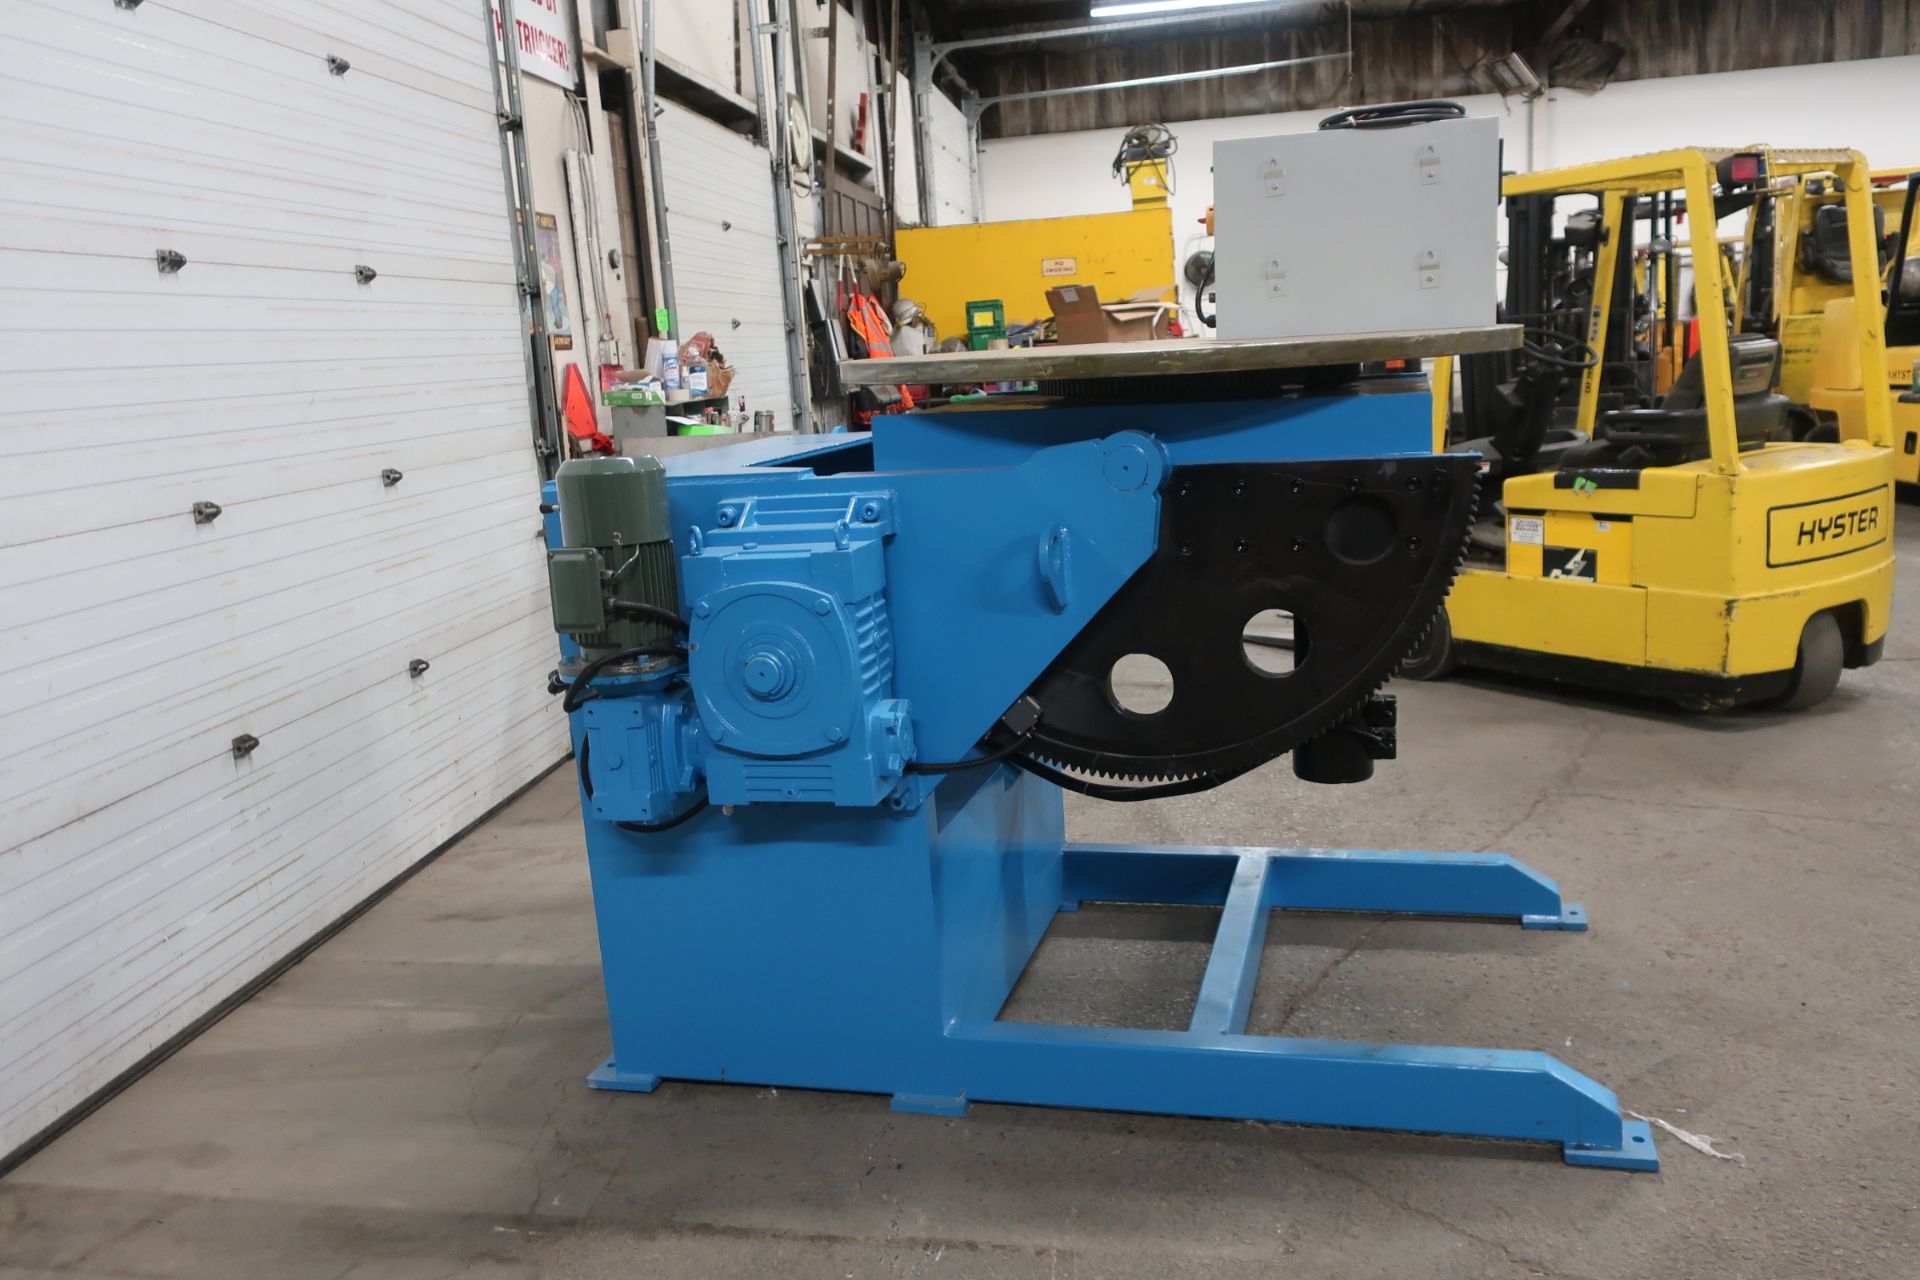 BWJ-30 WELDING POSITIONER 3000kg or 6600lbs capacity - tilt and rotate with variable speed drive and - Image 2 of 4